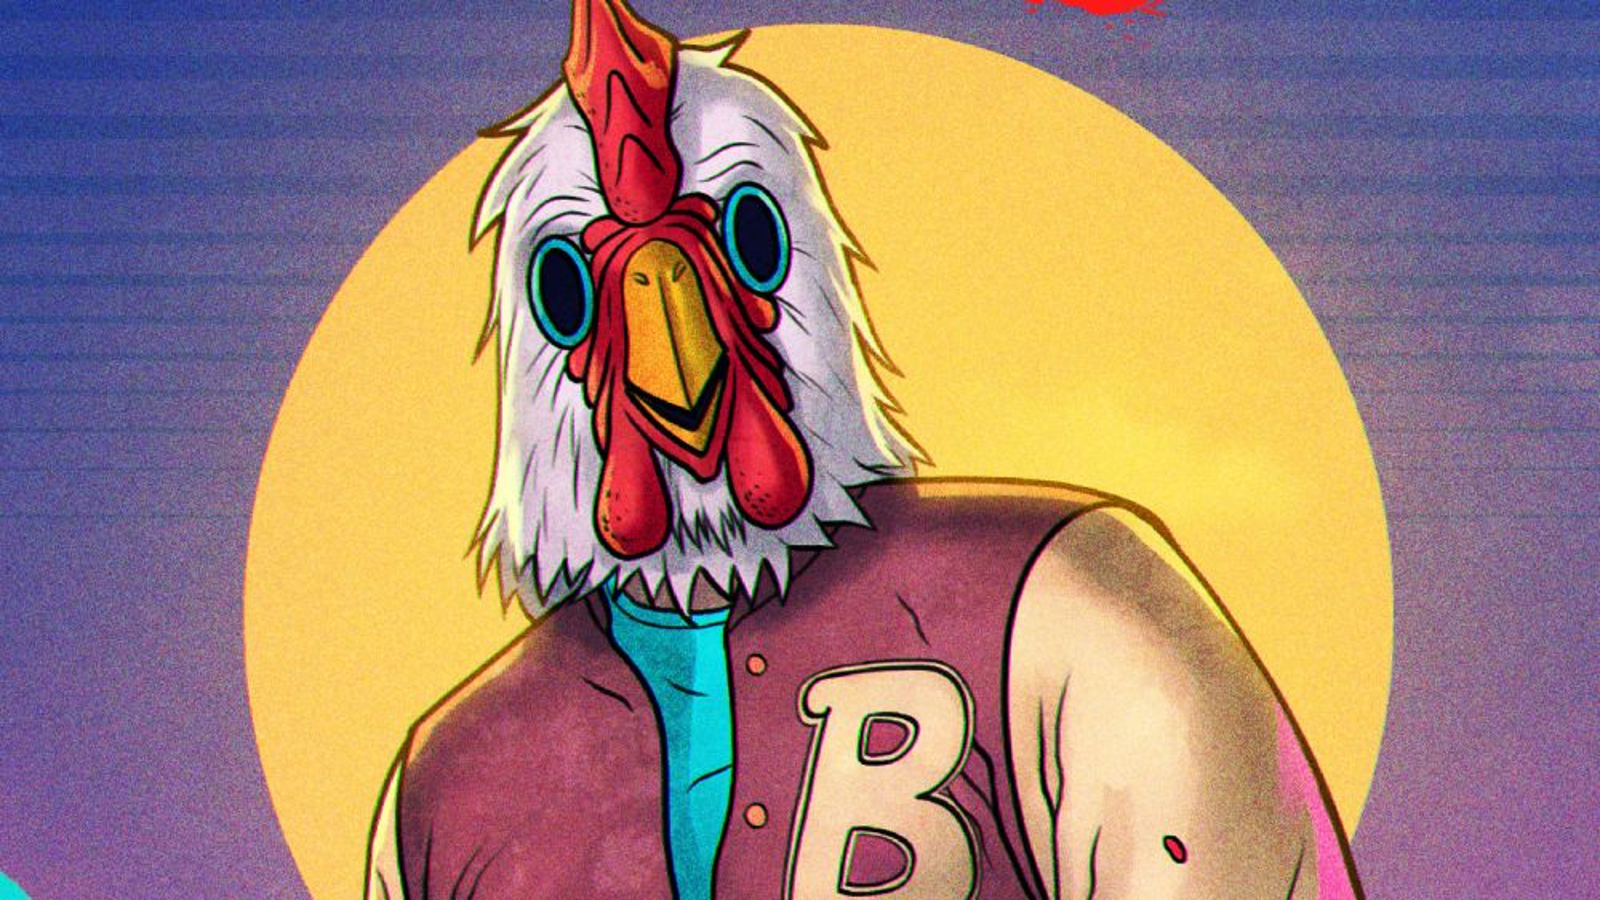 I made Jacket in Roblox. : r/HotlineMiami